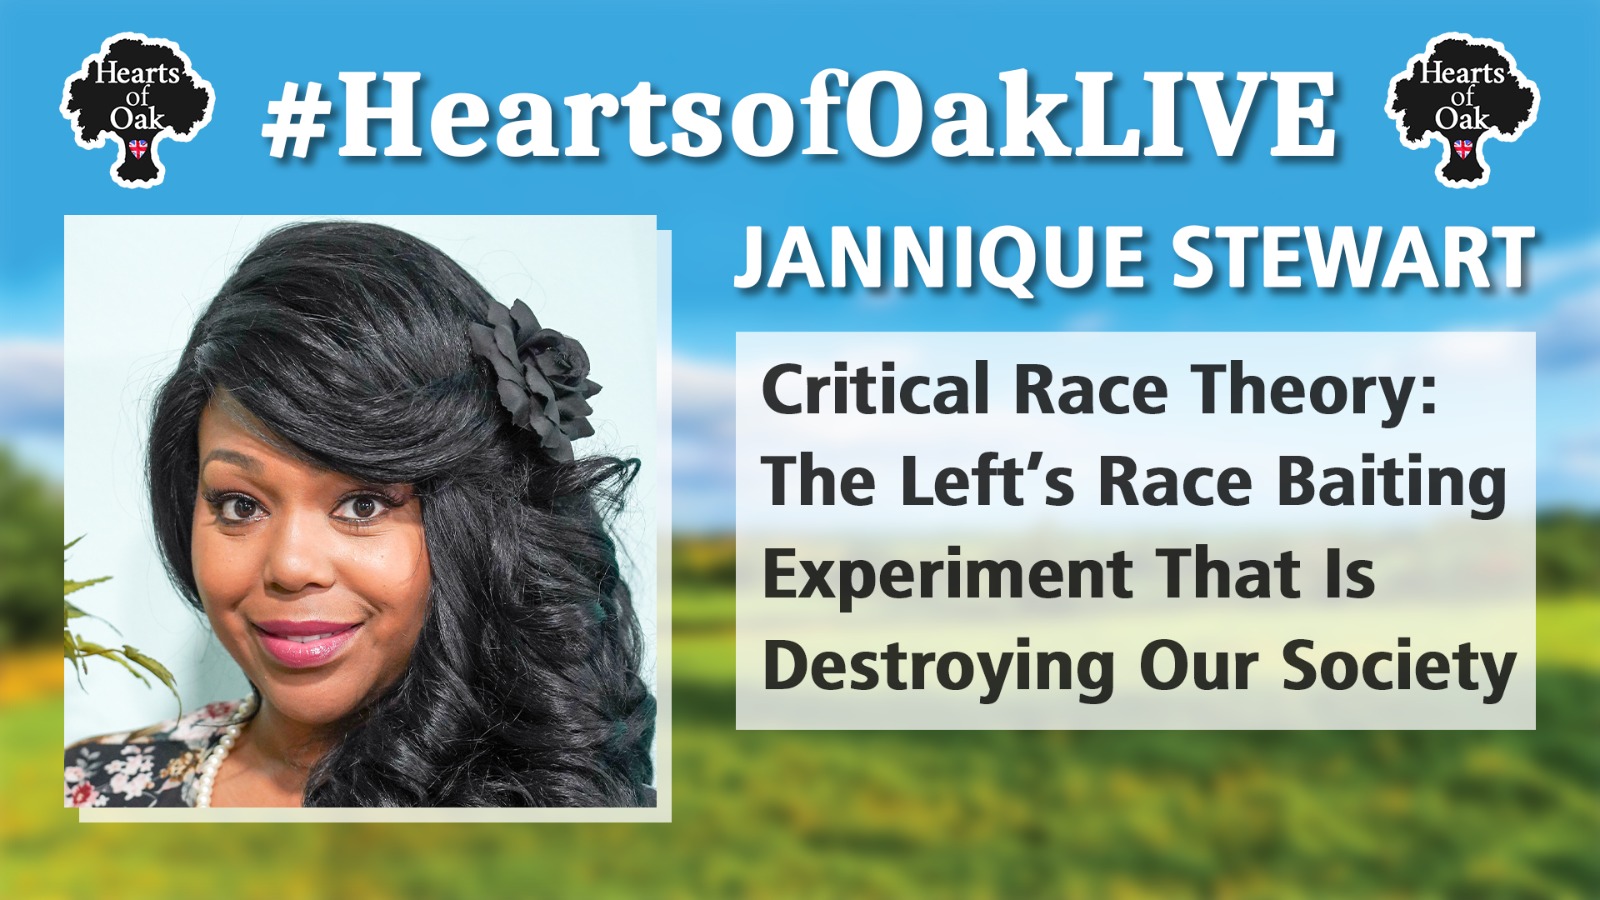 Jannique Stewart: Critical Race Theory; The Left's Race Baiting Experiment that's Destroying our Society